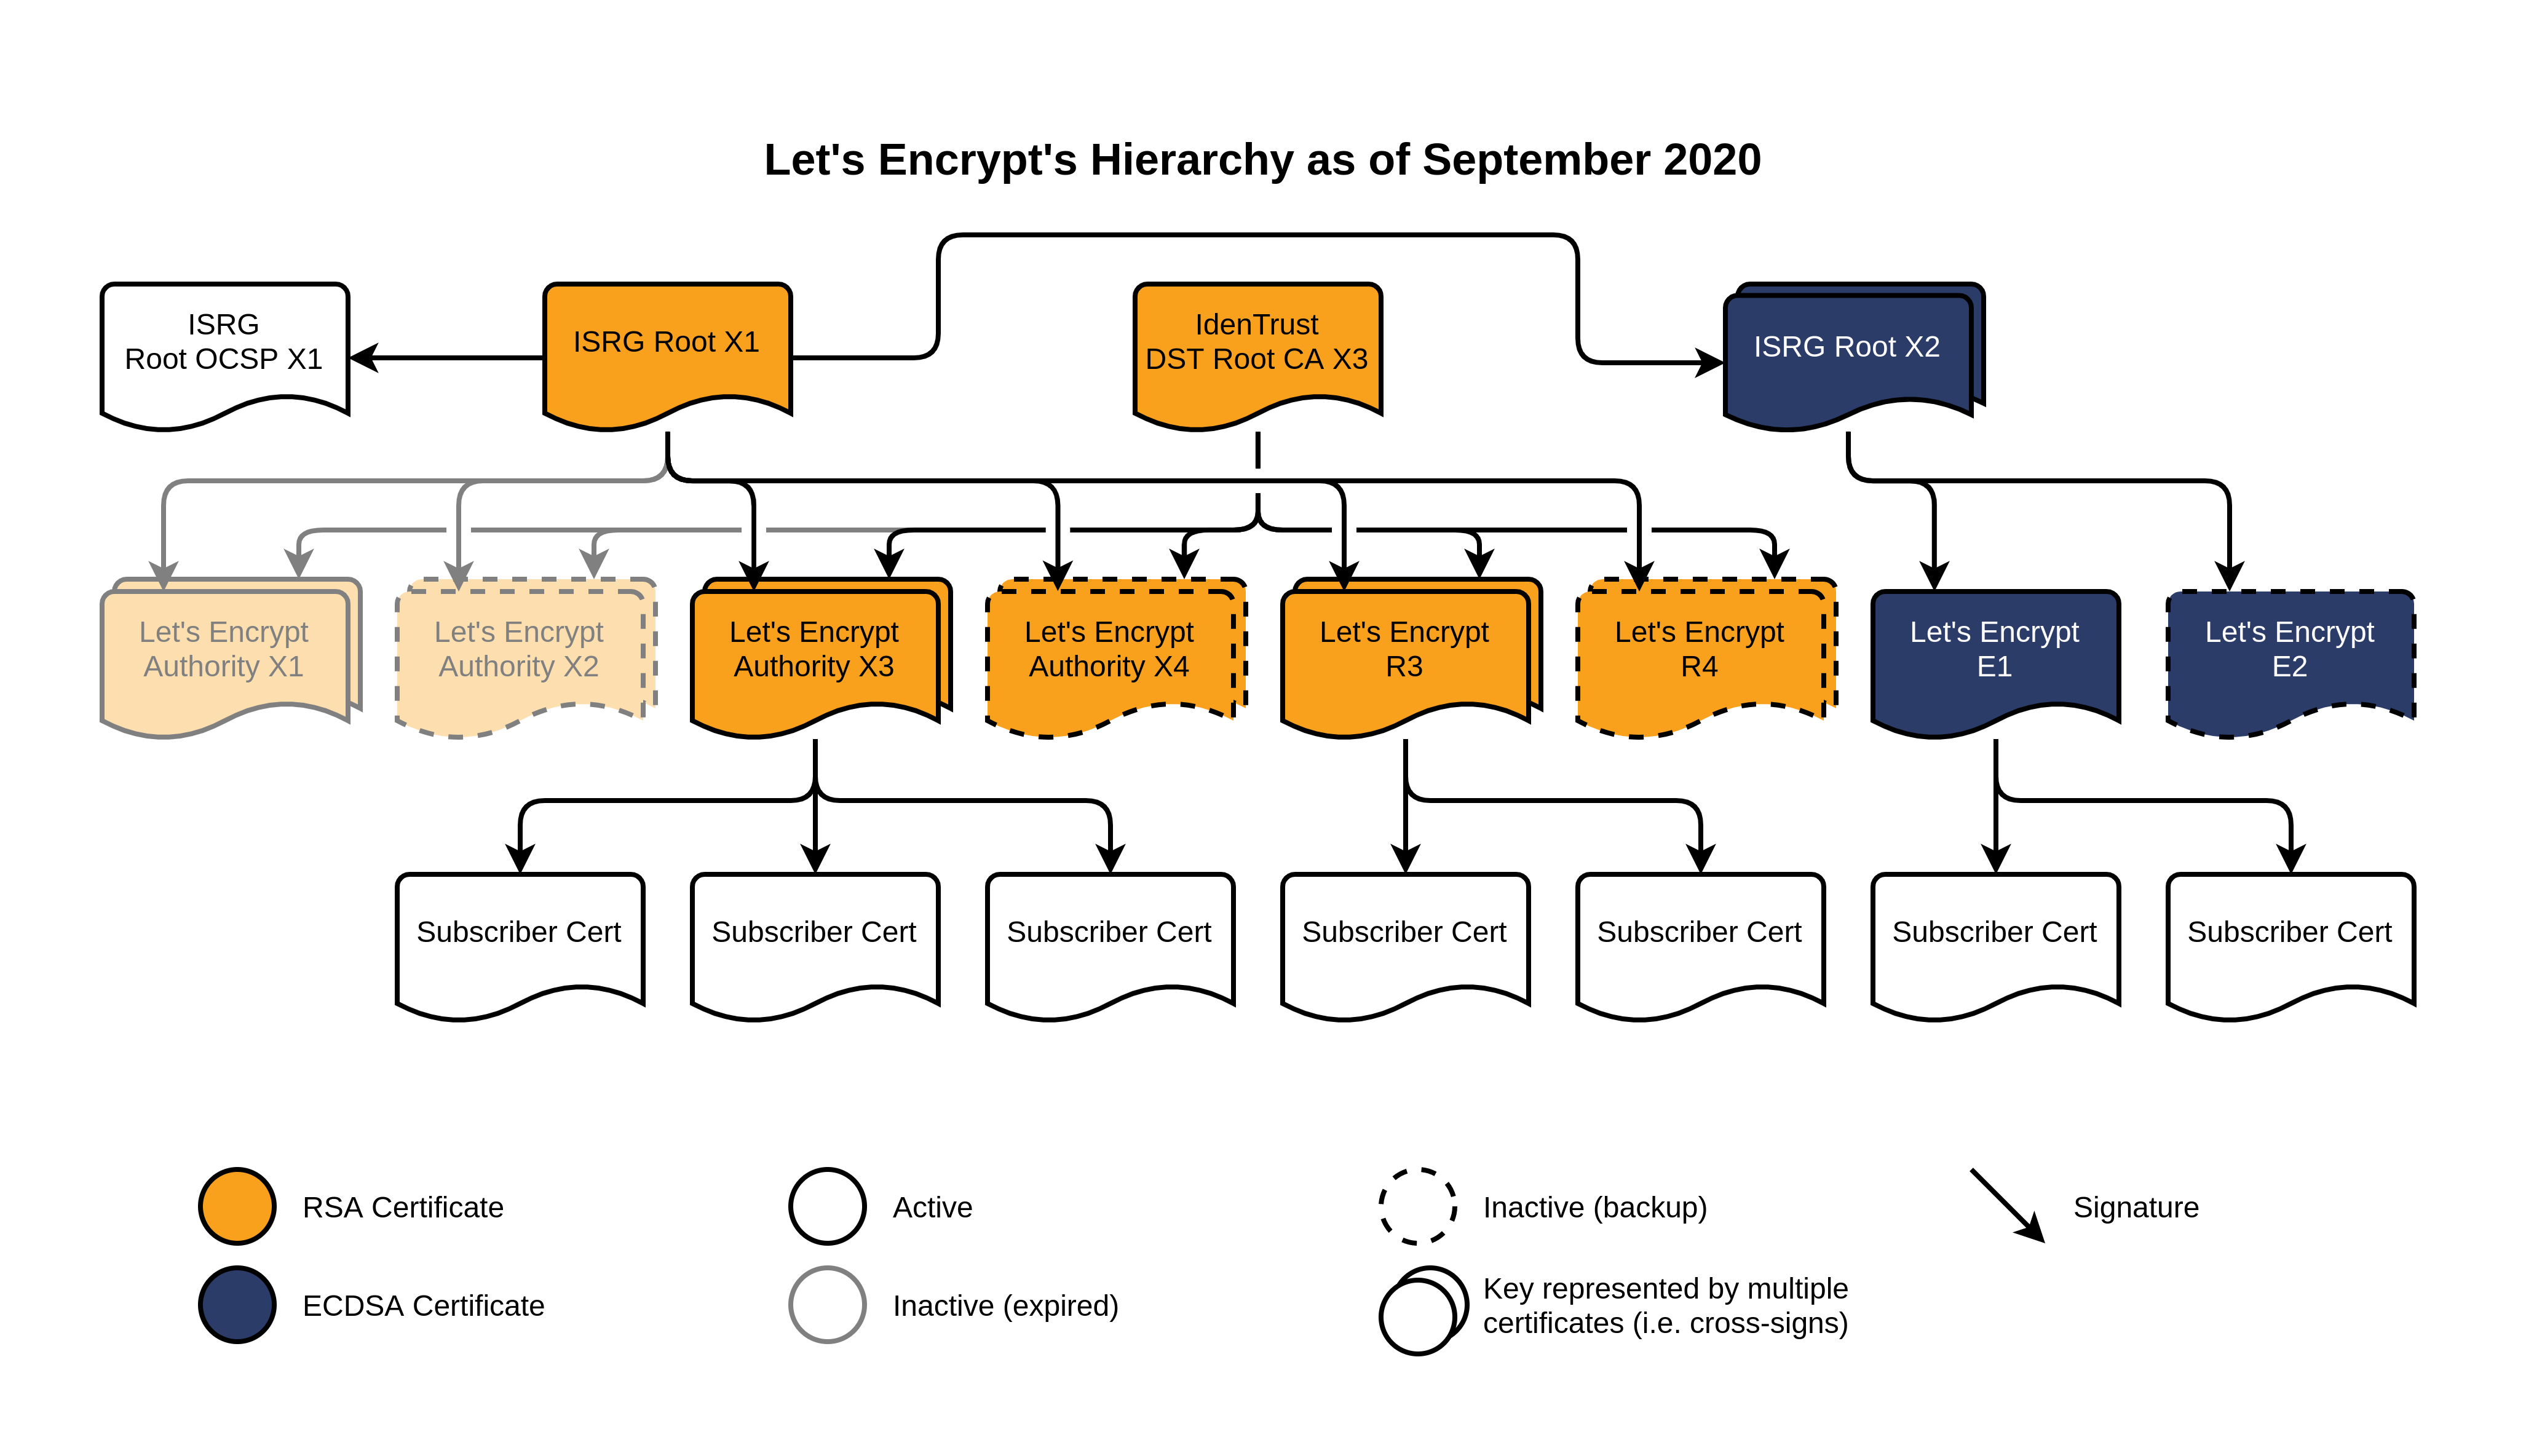 Let’s Encrypt’s hierarchy as of September 2020